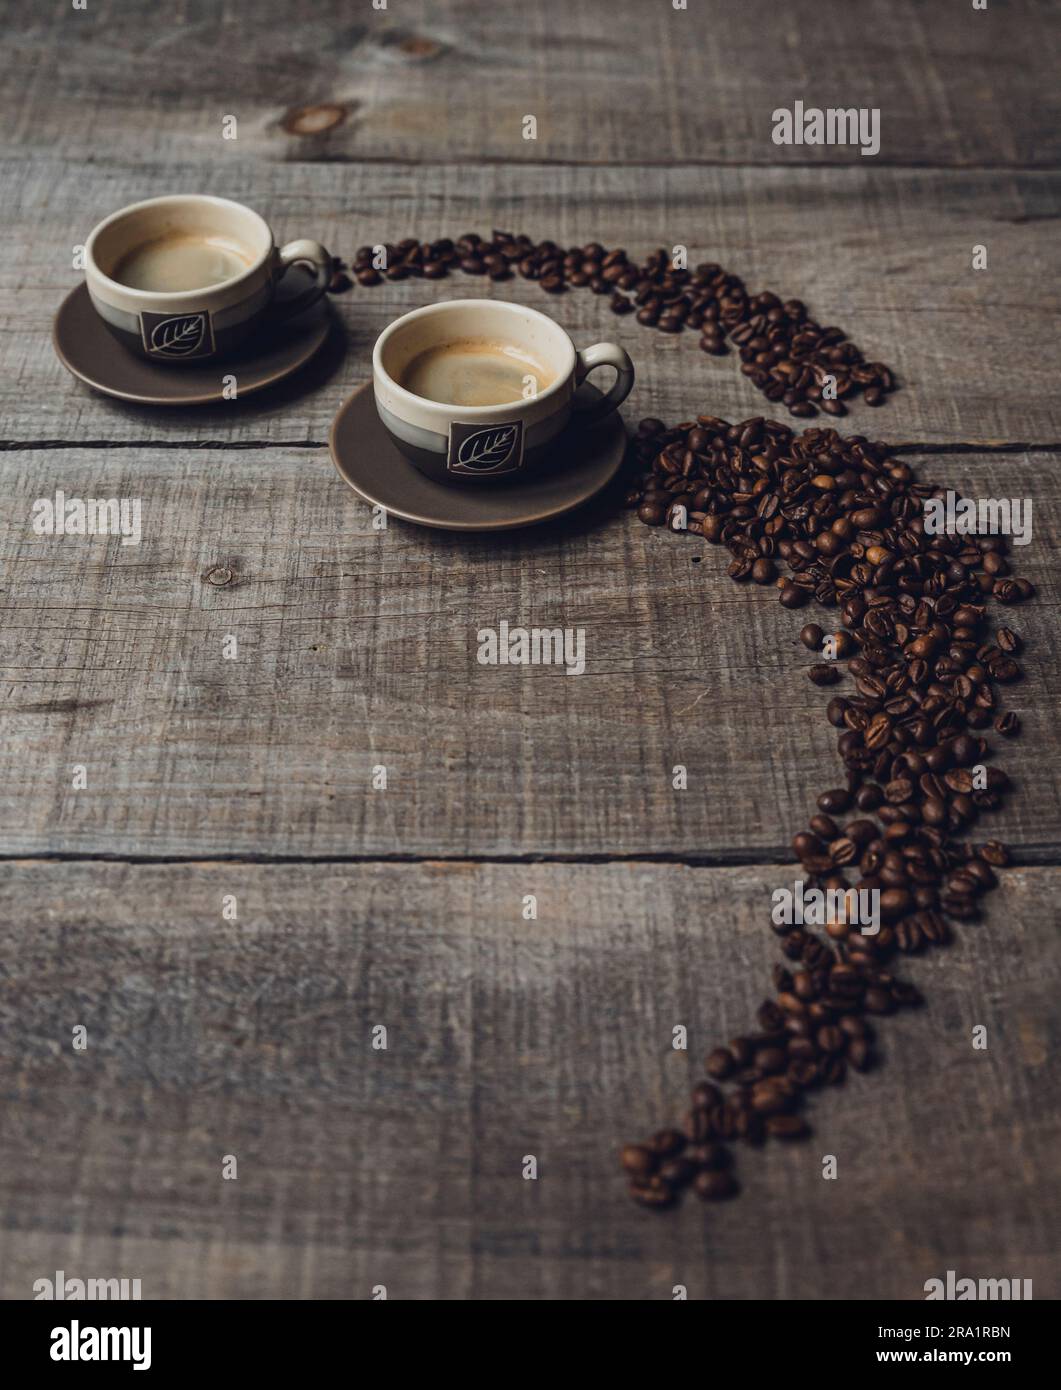 https://c8.alamy.com/comp/2RA1RBN/coffee-beans-leading-up-to-cups-of-espresso-on-a-wooden-table-2RA1RBN.jpg